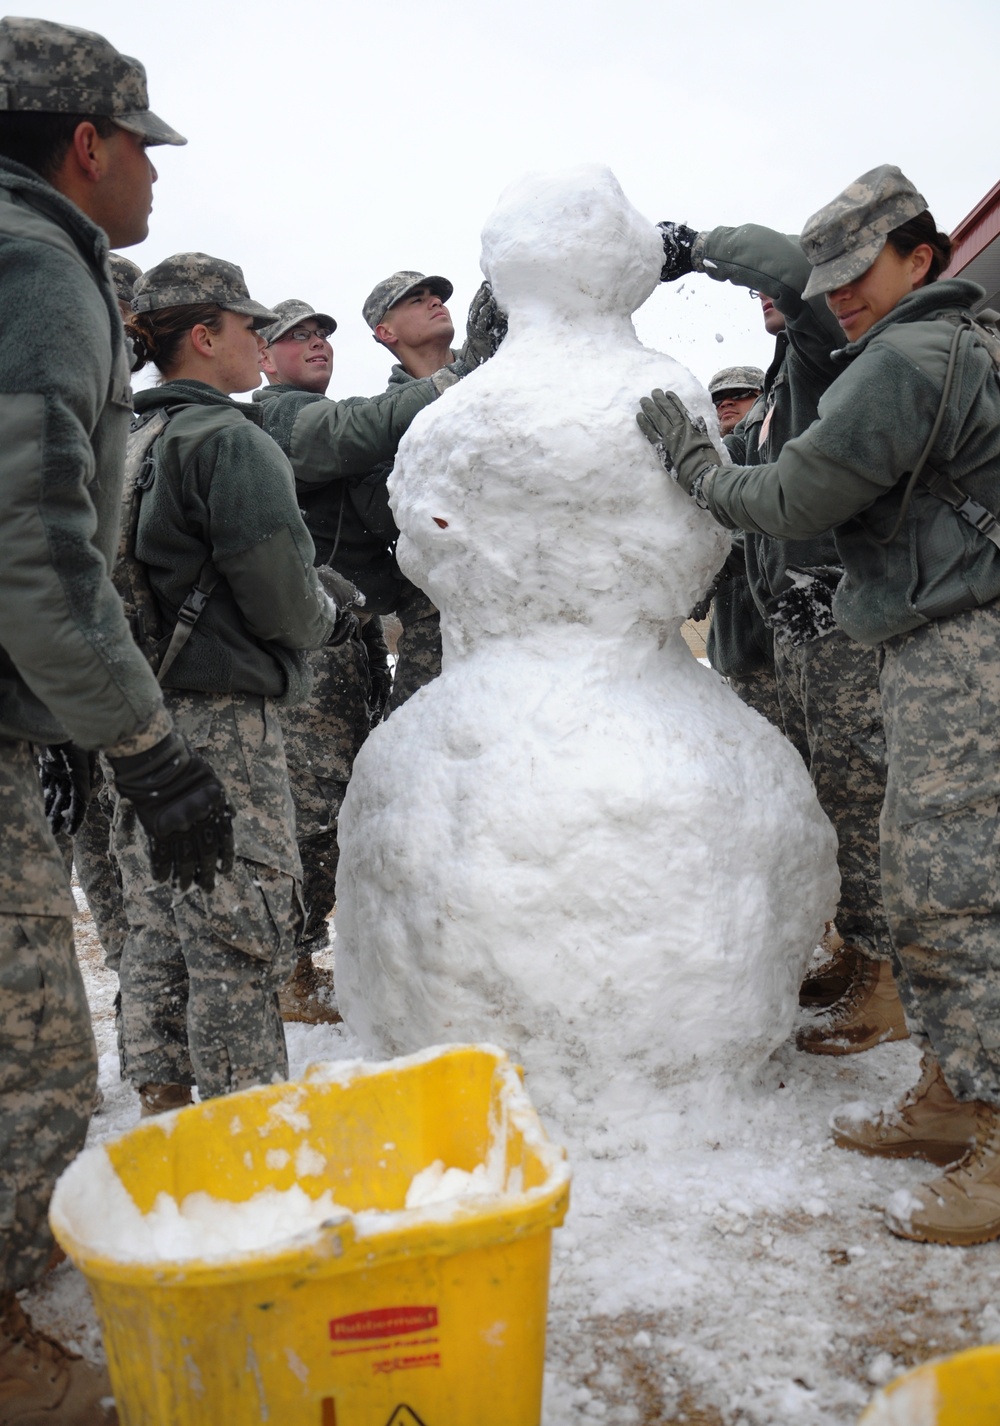 Snow day for soldiers